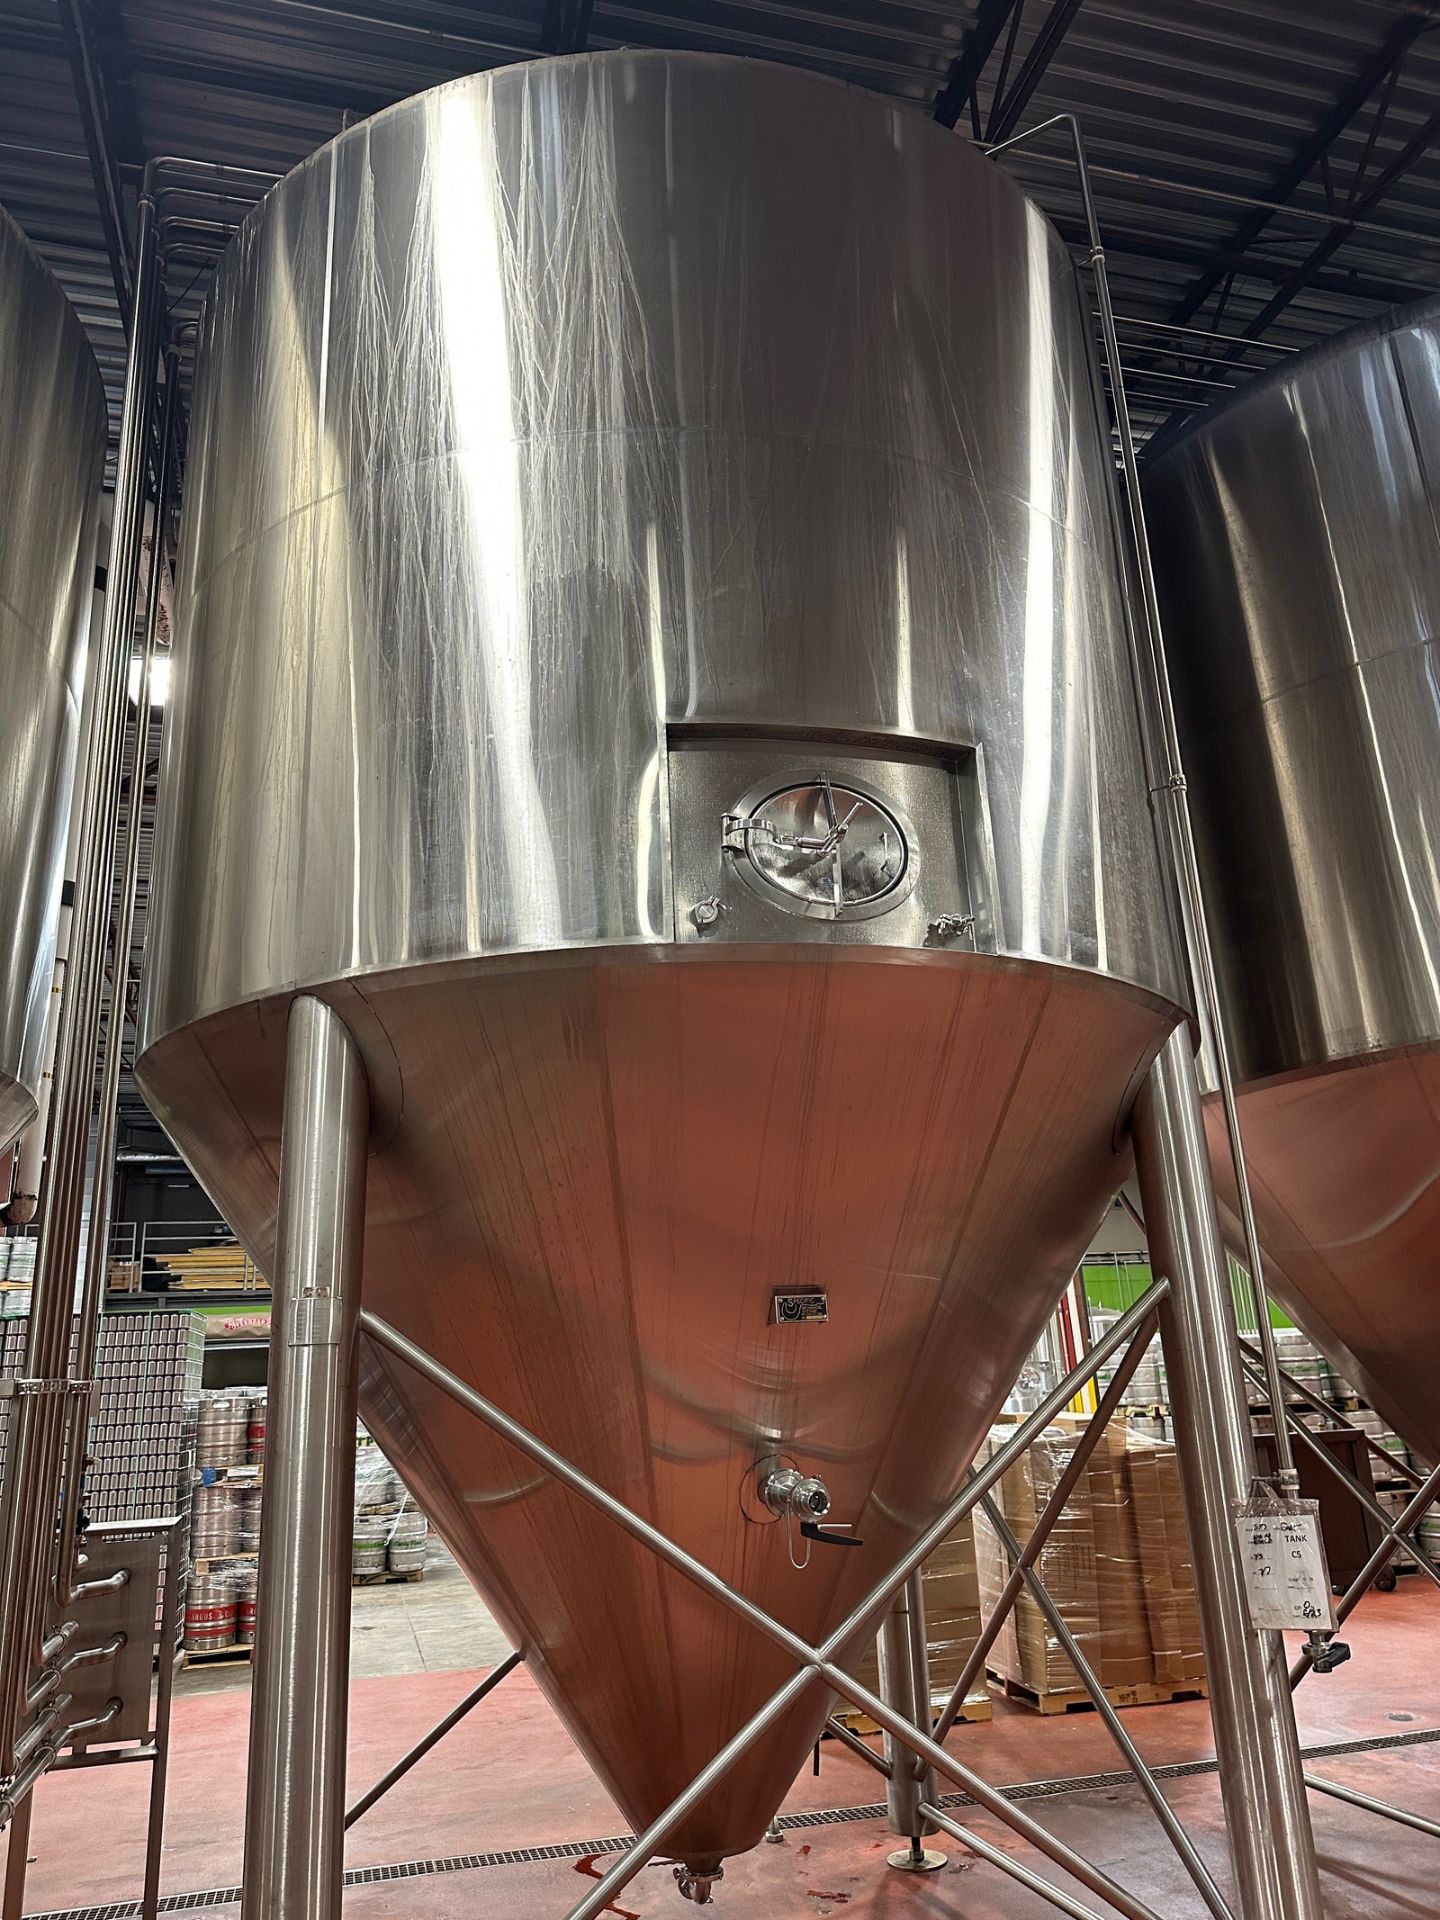 2016 - 300 BBL Specific Mechanical Stainless Steel Fermentation Tank - Cone Bottom, | Rig Fee $2900